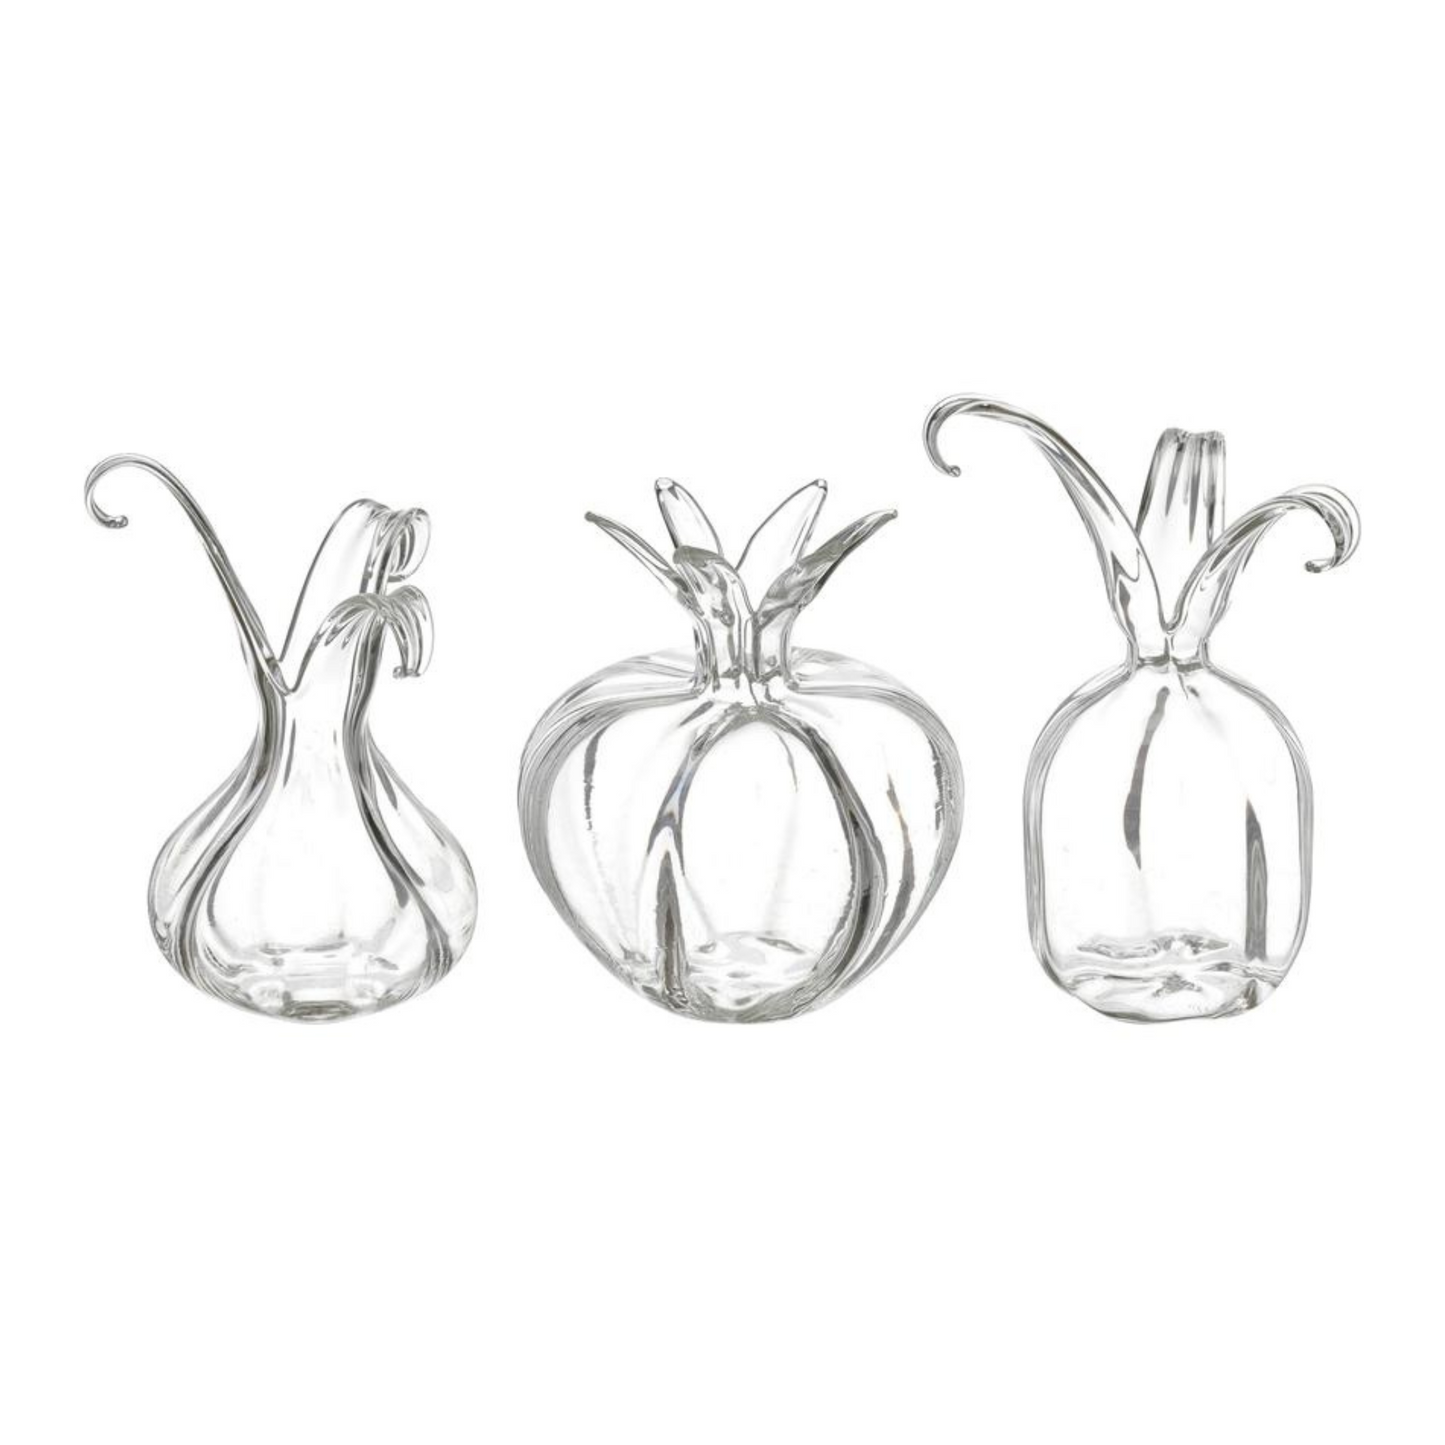 mini glass vases in abstract shape